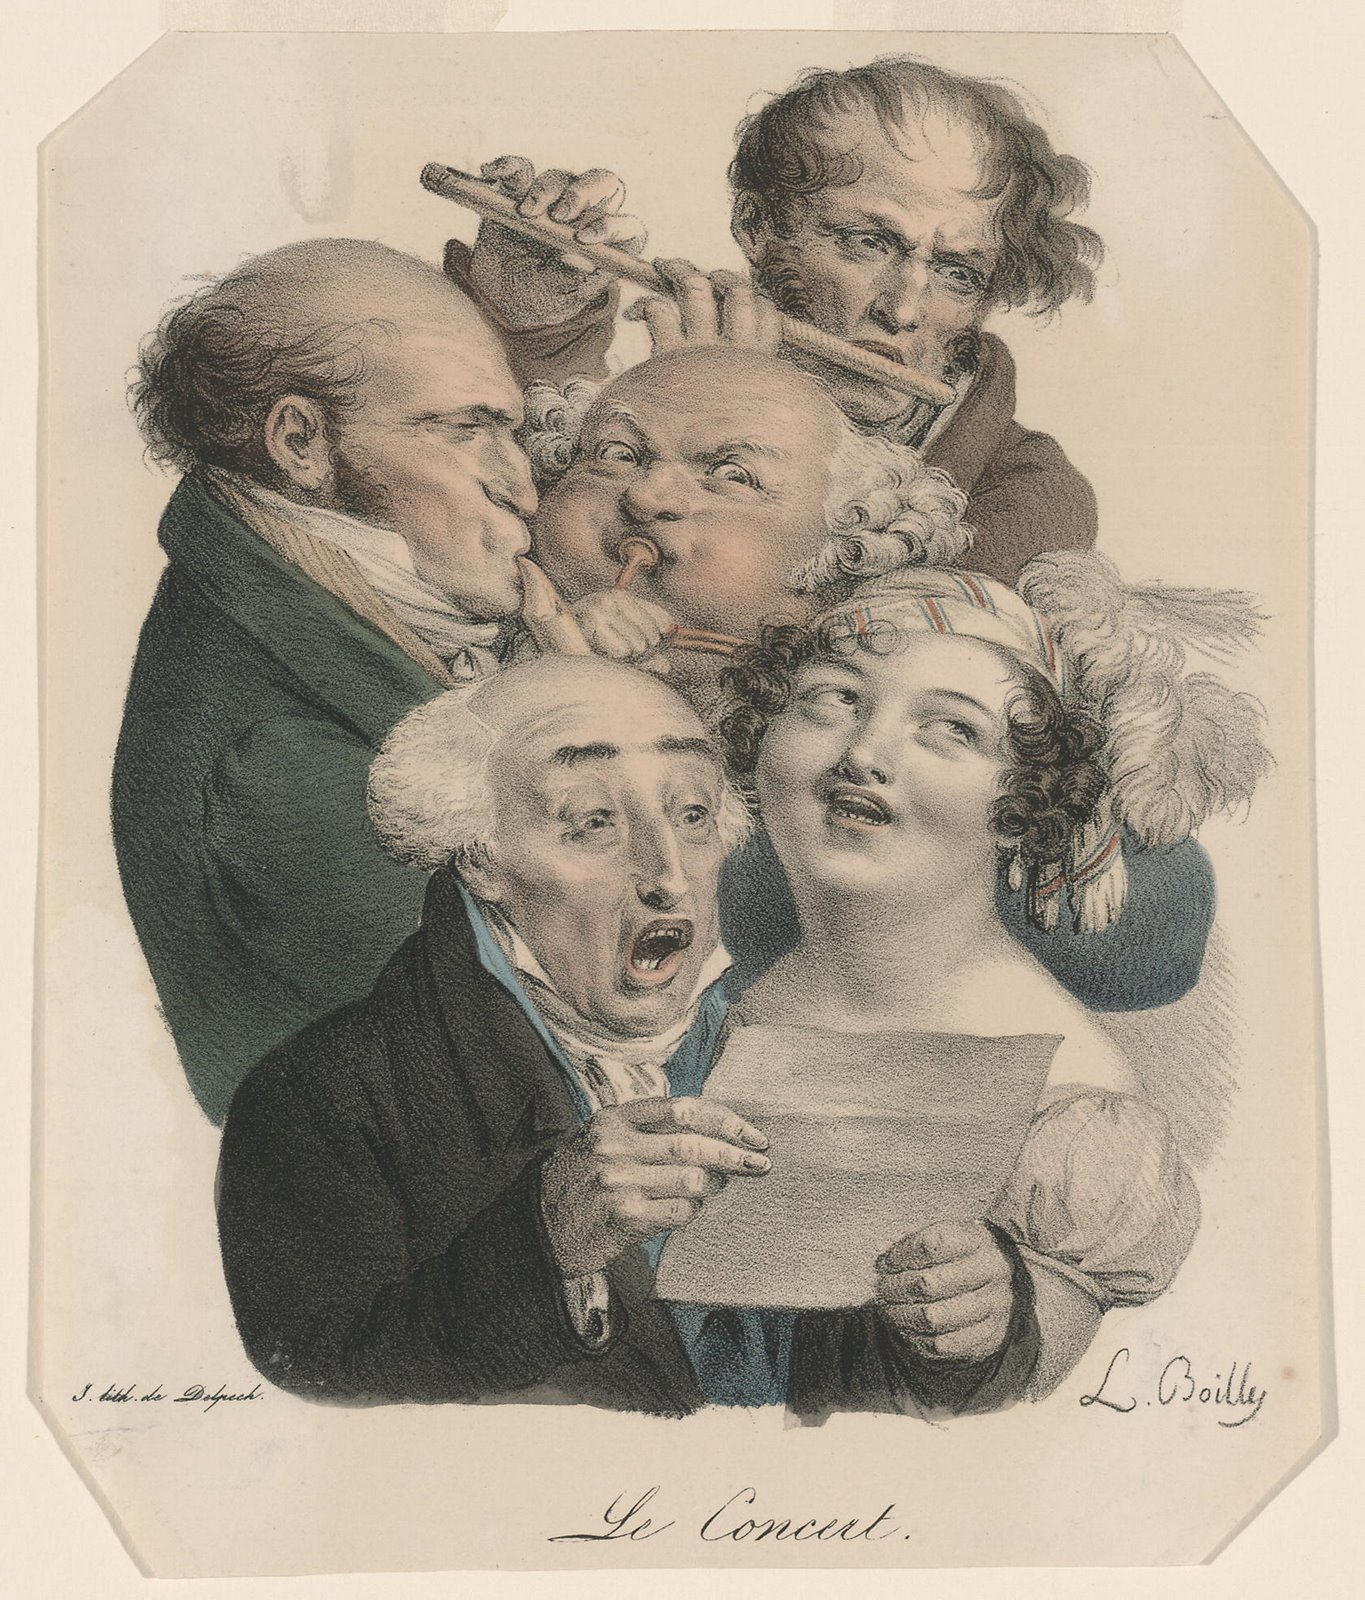 [Louis-Lopold+Boilly+Le+Concert+(The+Concert),+19th+century.jpg]